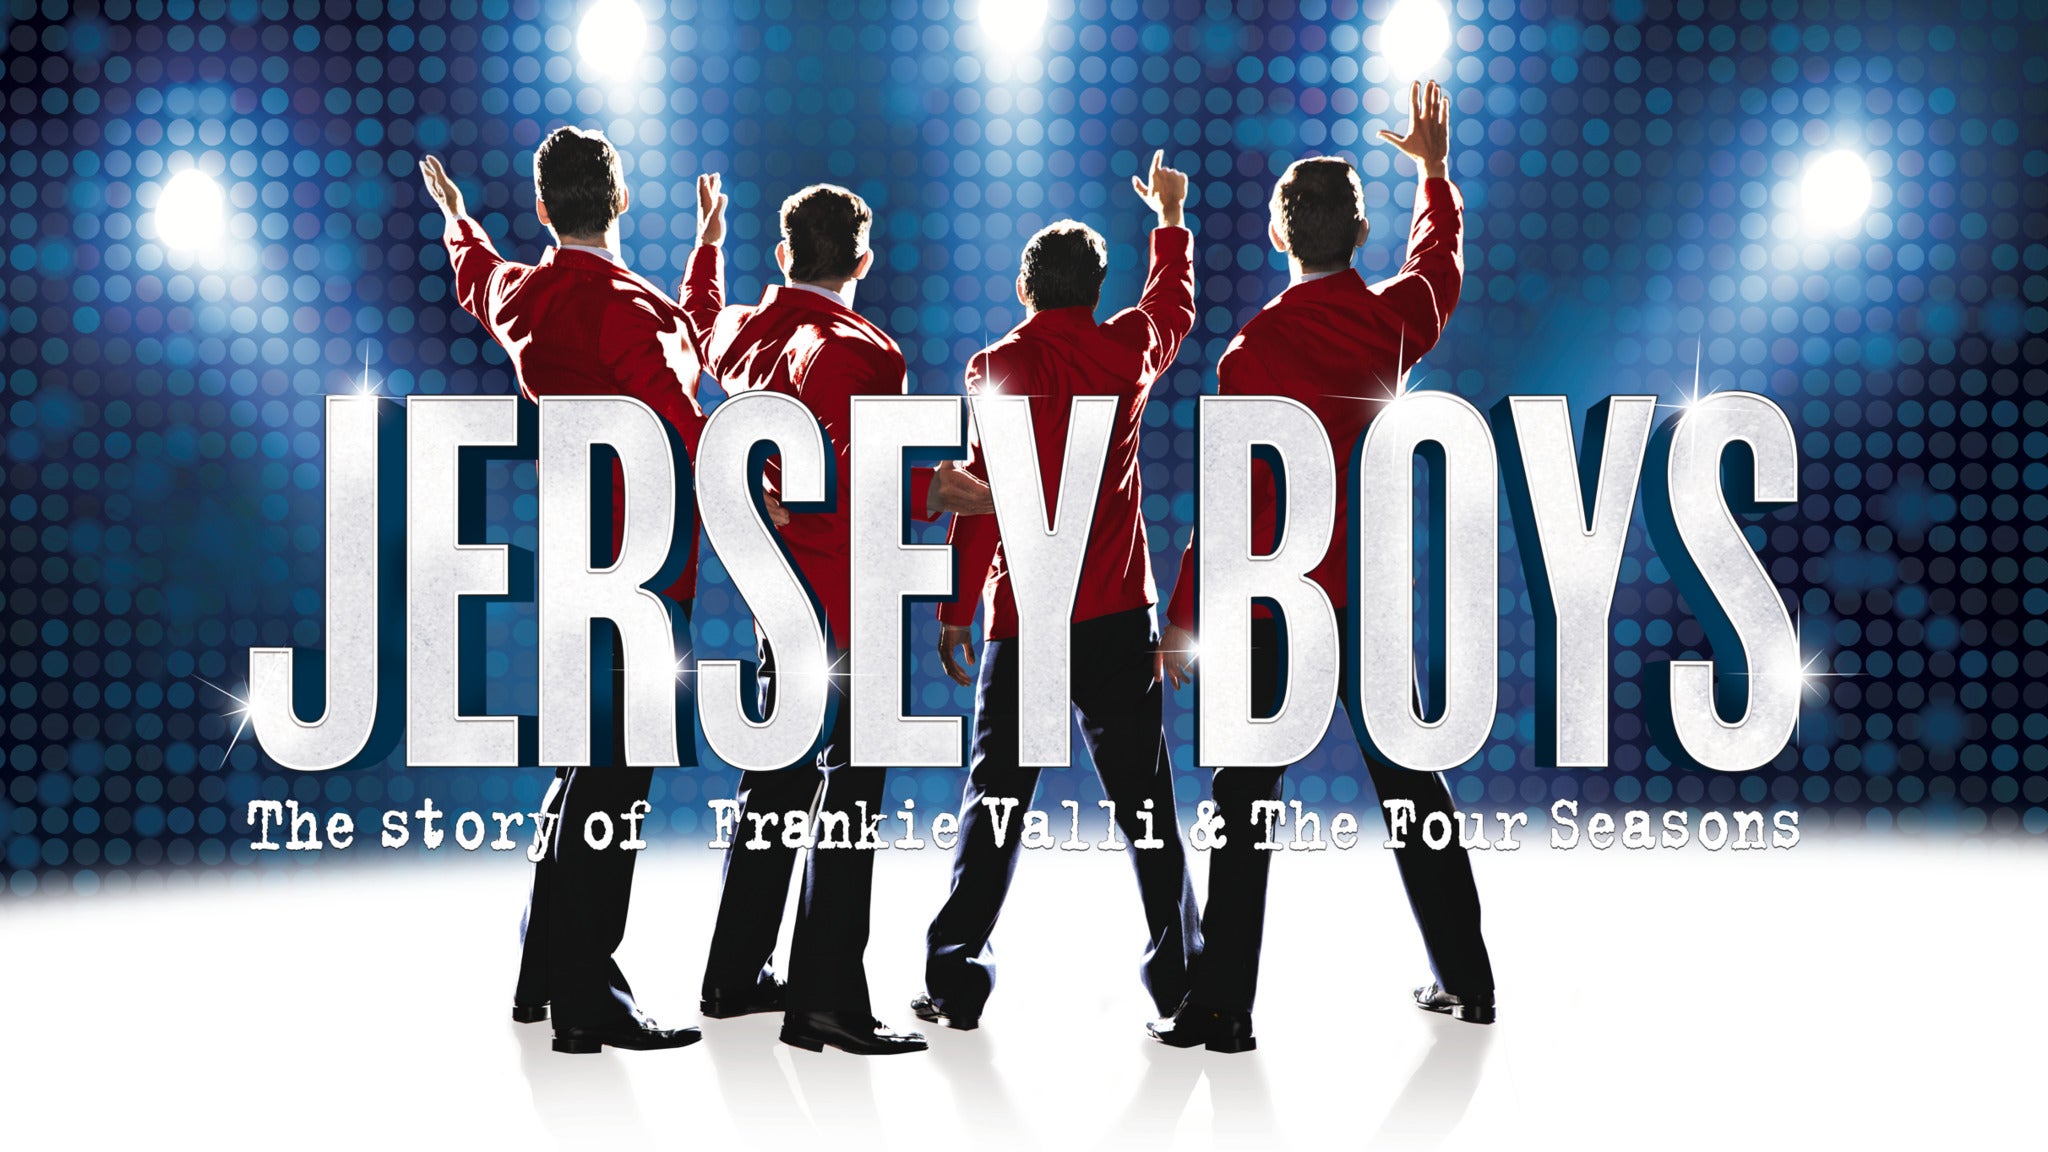 who wrote jersey boys